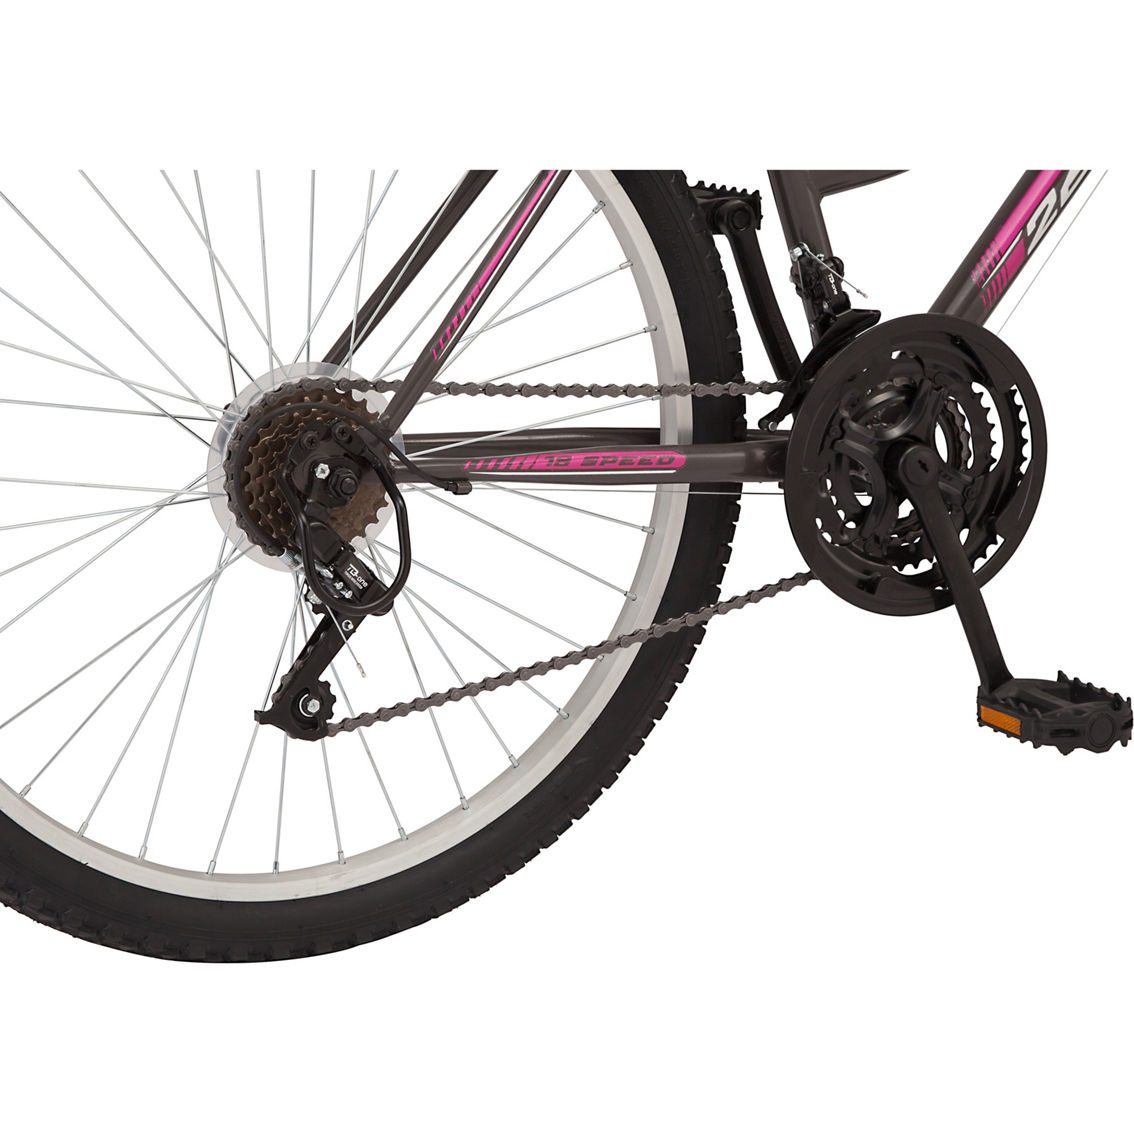 Pacific Women's Mountain Sport 26 in. Front Suspension Mountain Bike - Image 6 of 10